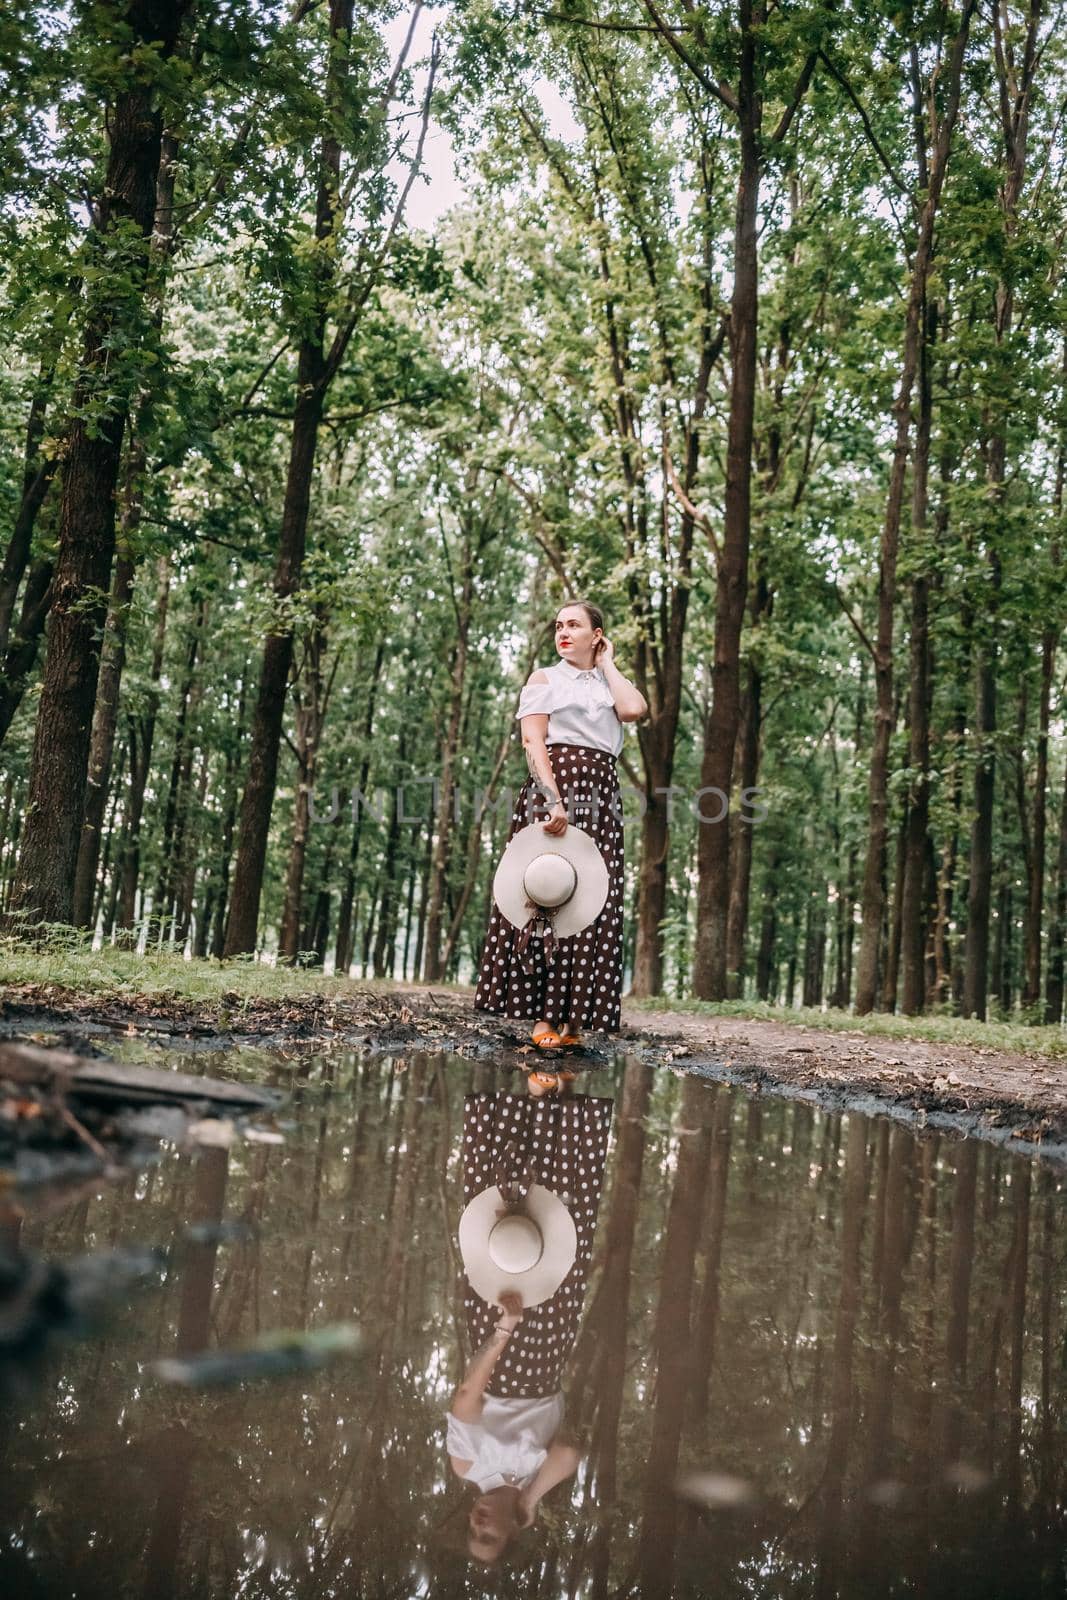 photo of a girl in the reflection of a puddle, in the forest.